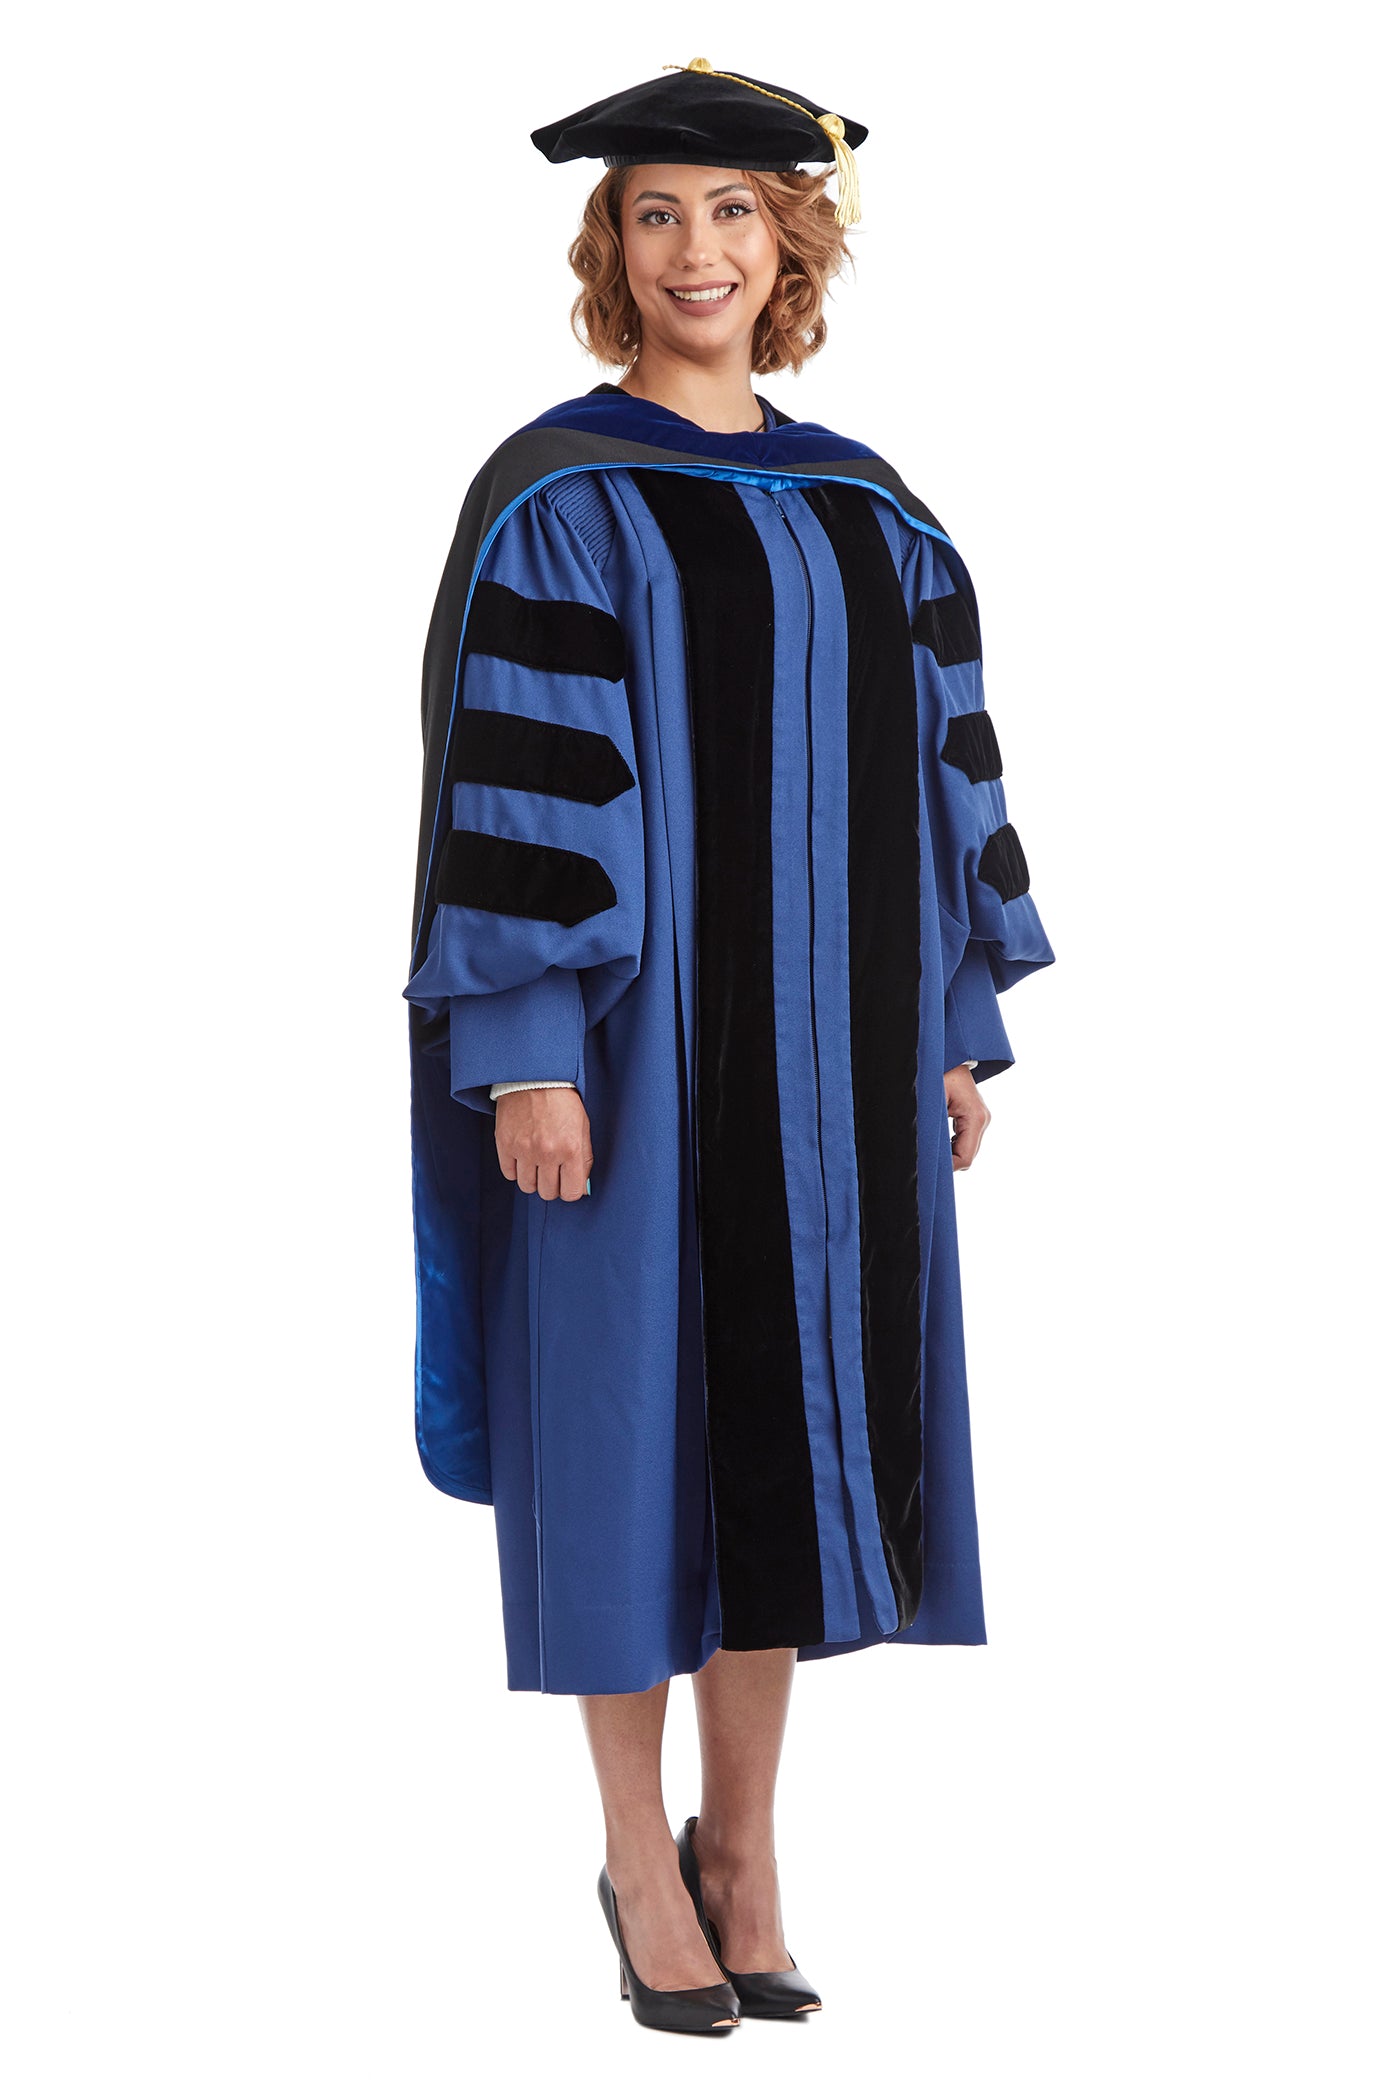 Yale University Doctoral Regalia Set. Doctoral Gown, PhD Hood, and Eight Sided Doctoral Tam with Tassel